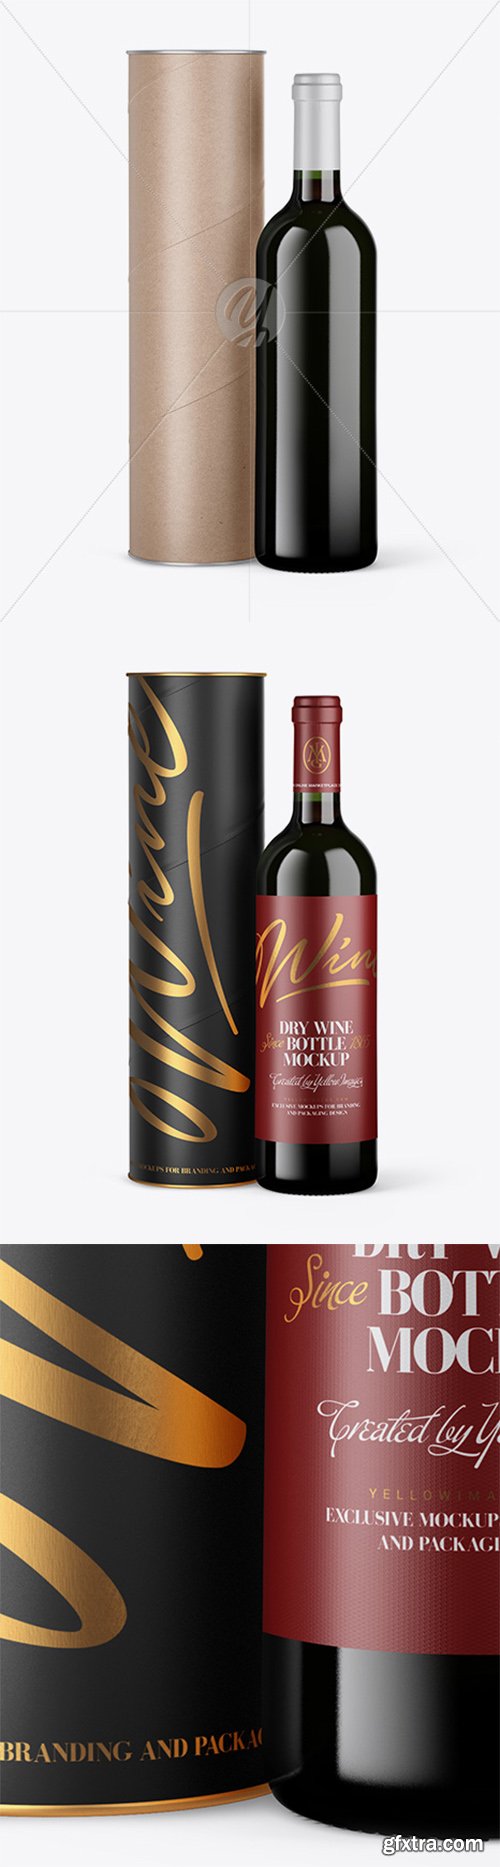 Green Glass Red Wine Bottle and Tube Mockup 28052